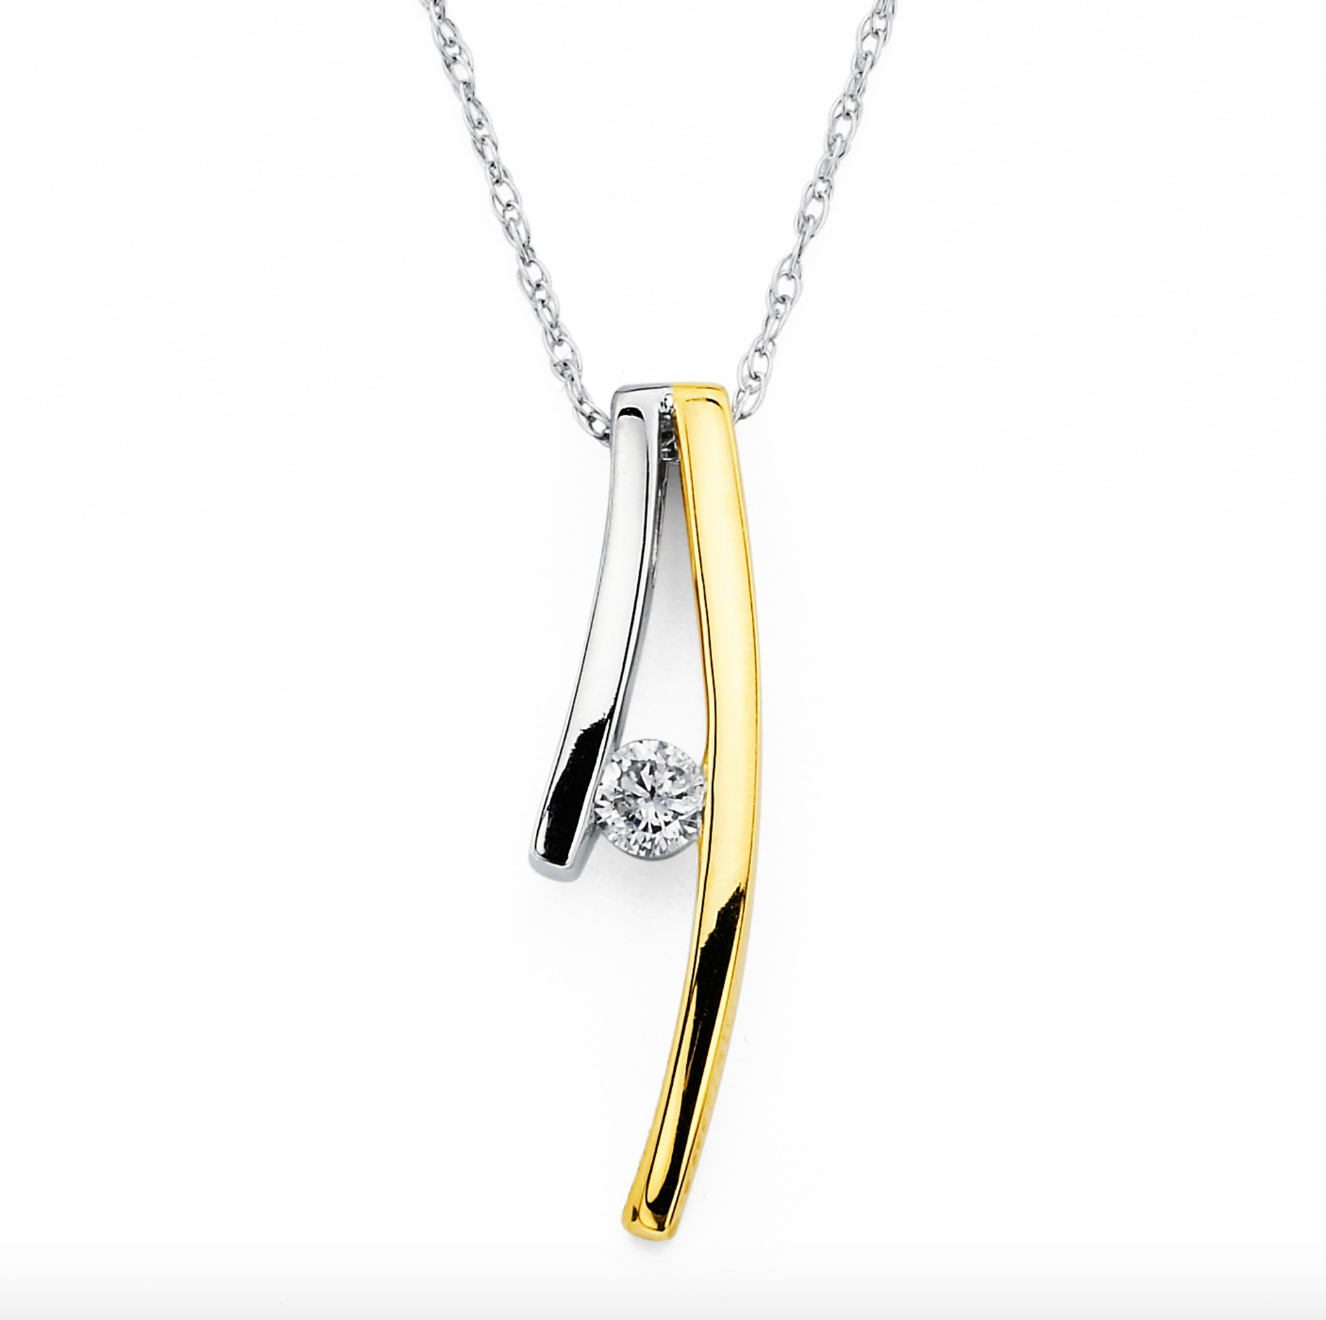 Diamond Ladder Necklace Two-Tone White and Yellow Gold - Talisman Collection Fine Jewelers